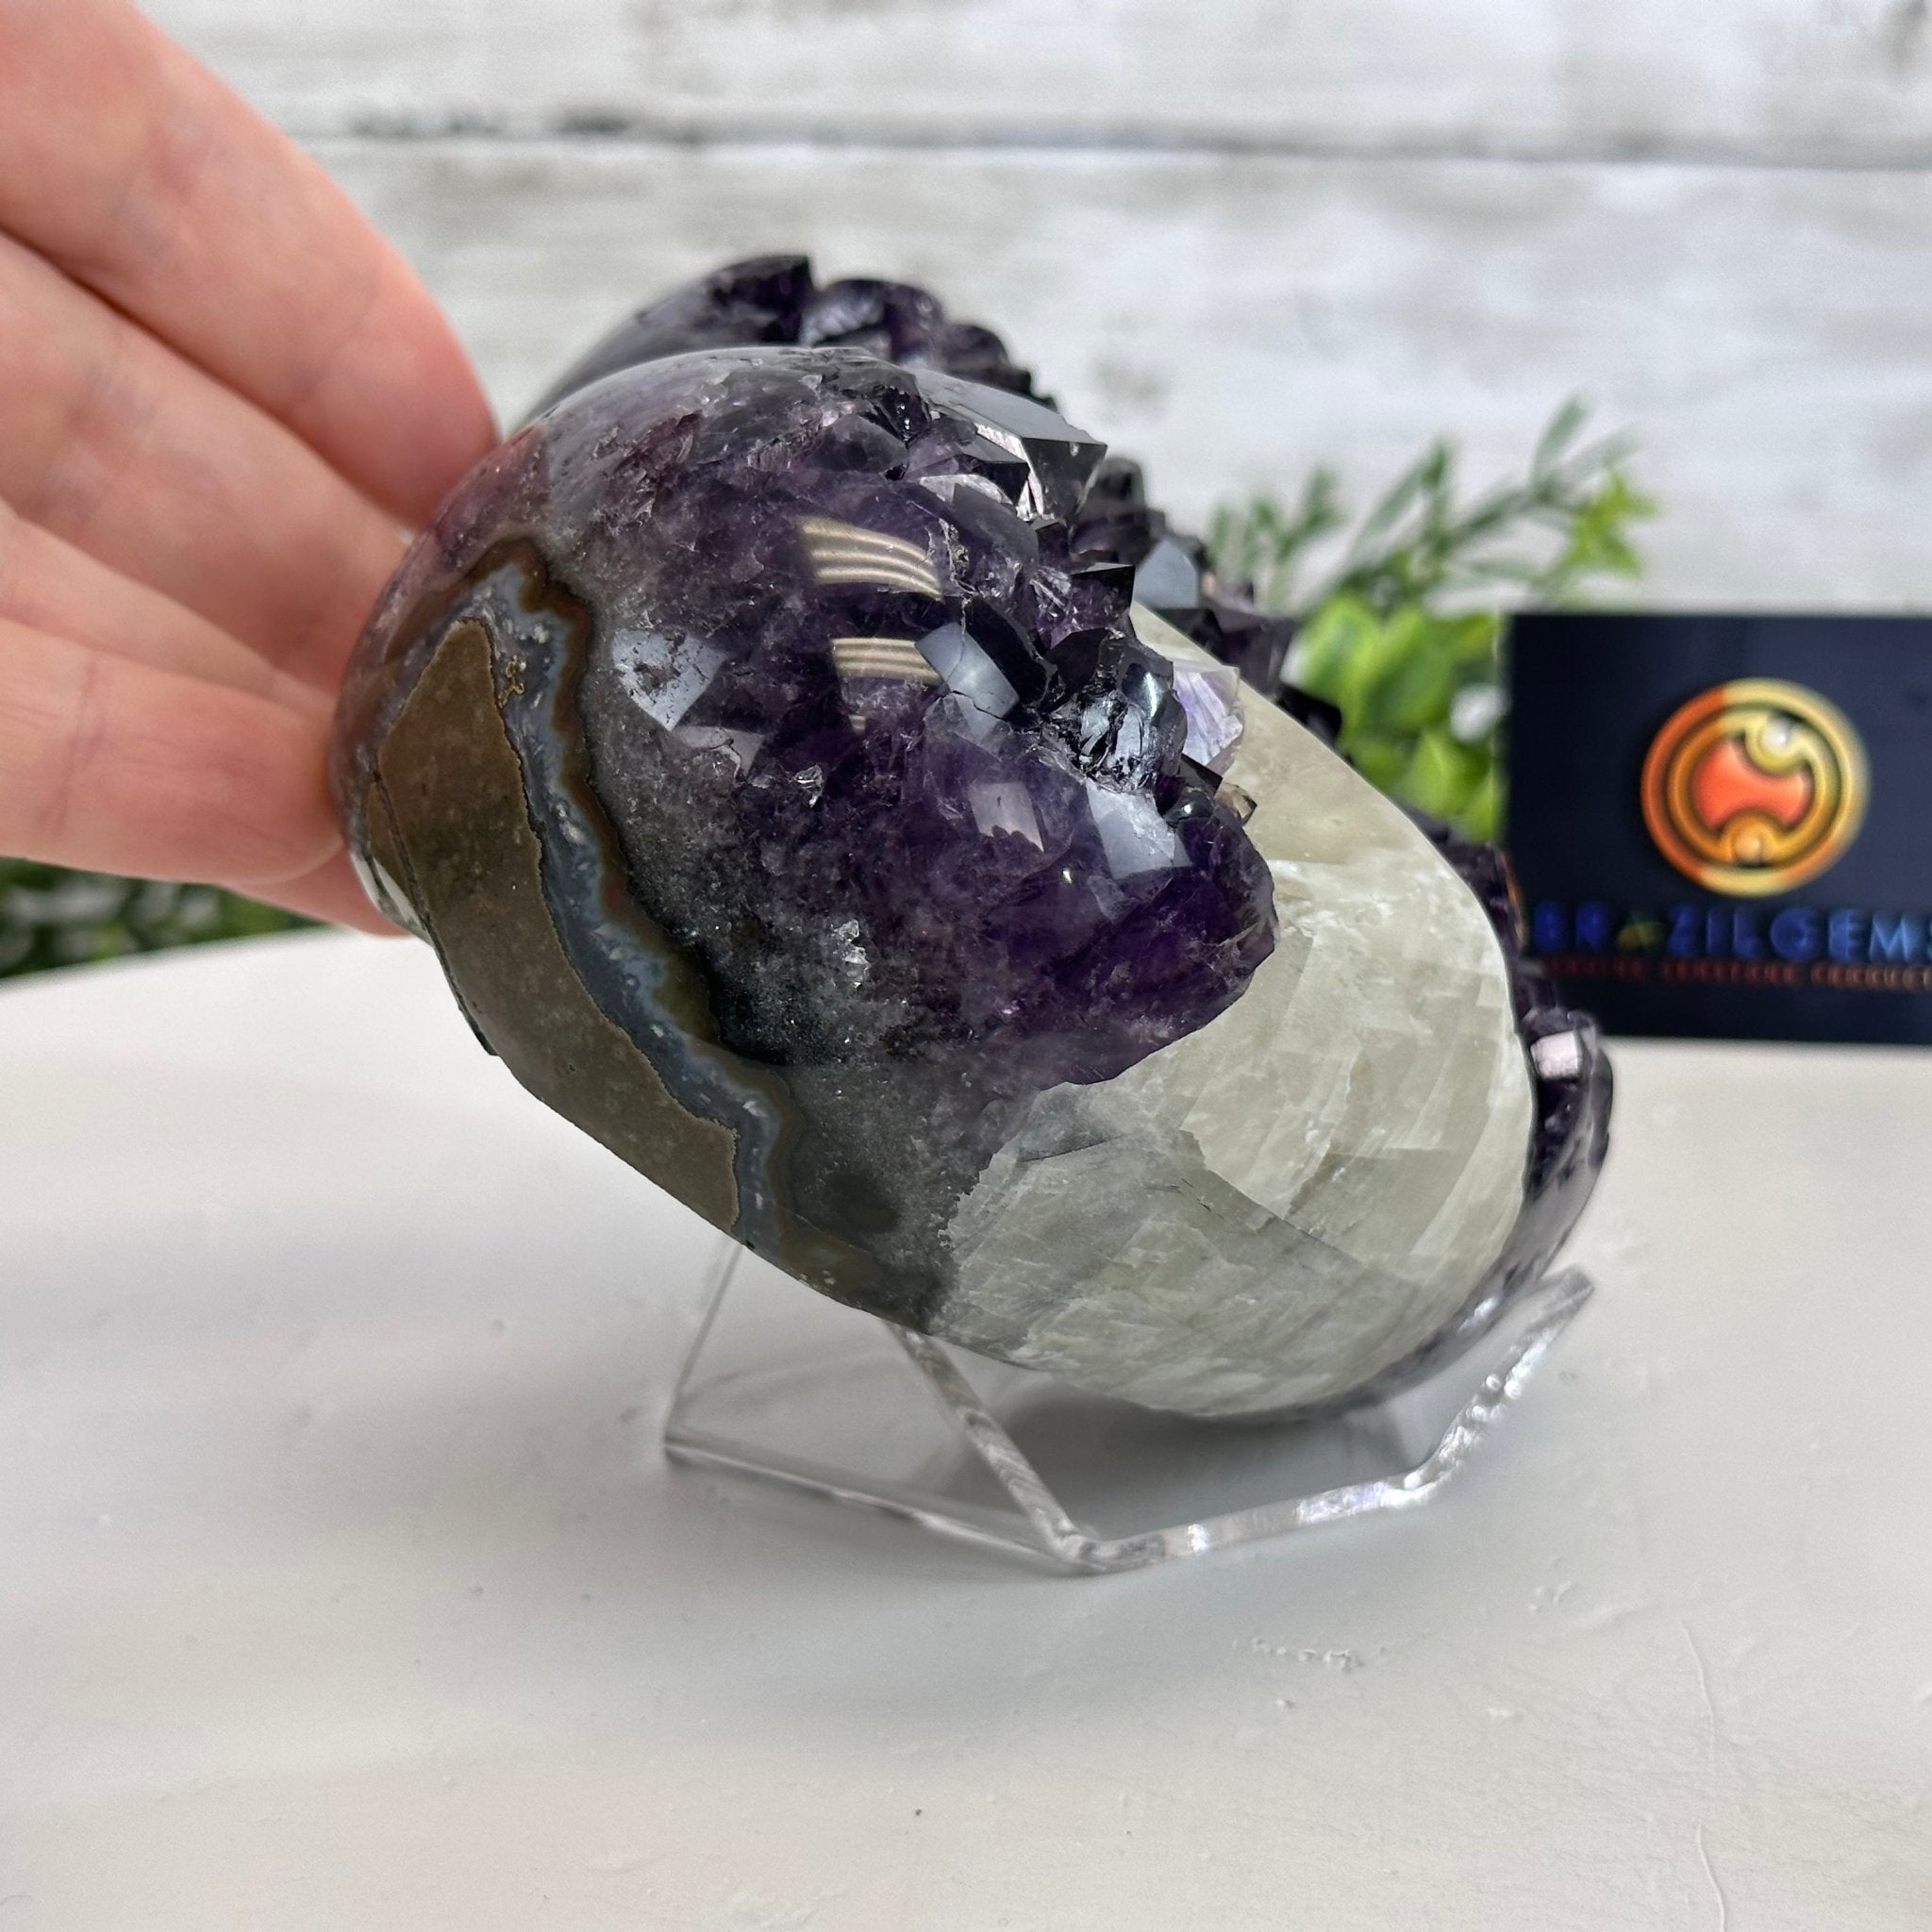 Super Quality Amethyst Heart Geode on an Acrylic Stand 2.7 lbs & 3.75" Tall #5462-0104 by Brazil Gems - Brazil GemsBrazil GemsSuper Quality Amethyst Heart Geode on an Acrylic Stand 2.7 lbs & 3.75" Tall #5462-0104 by Brazil GemsHearts5462-0104